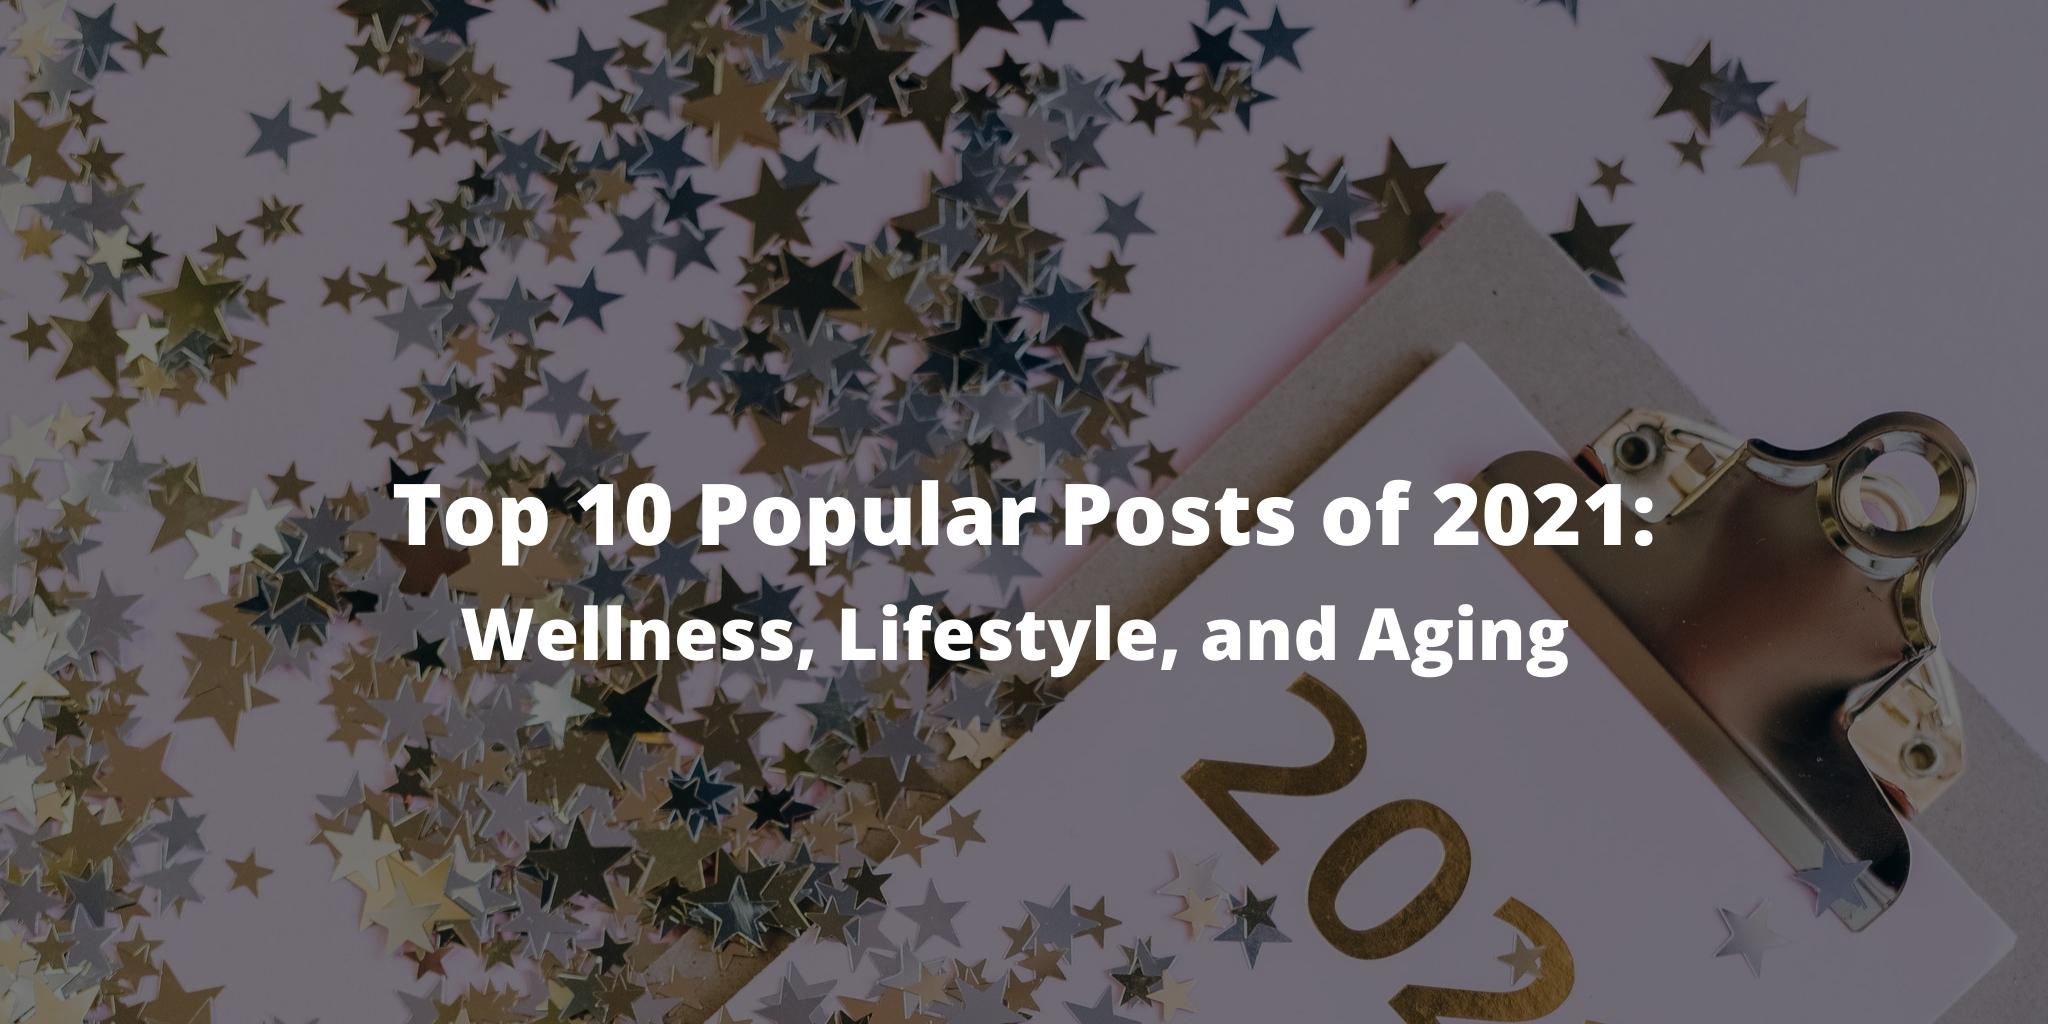 Top 10 Popular Posts of 2021: Wellness, Lifestyle, and Aging